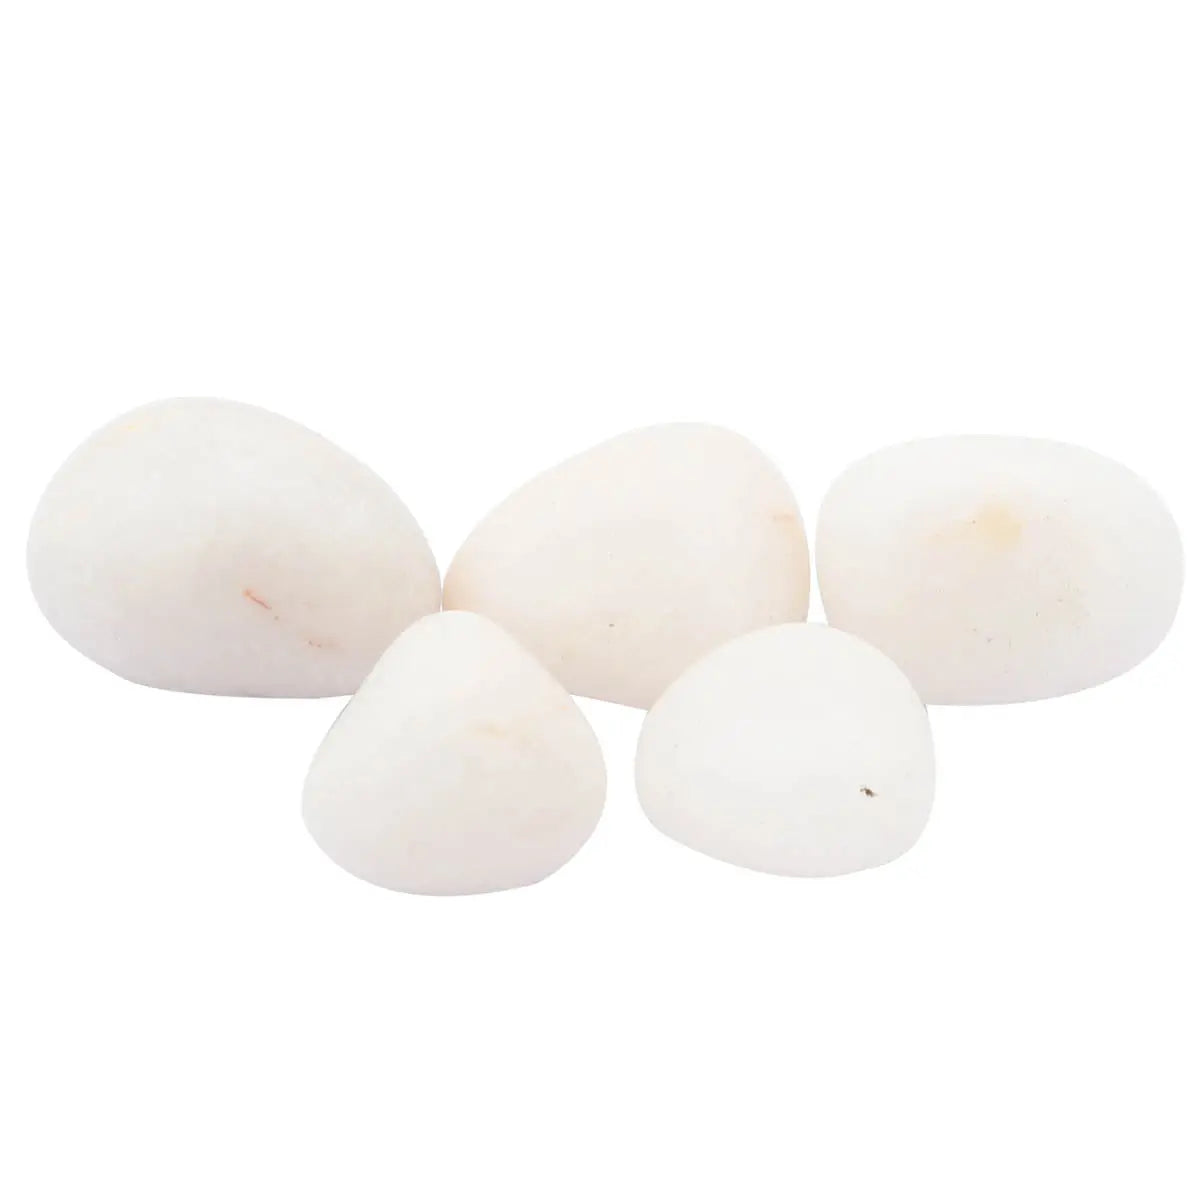 White Agate -  Chakra Crystals Healing Stones Healing Crystal Home